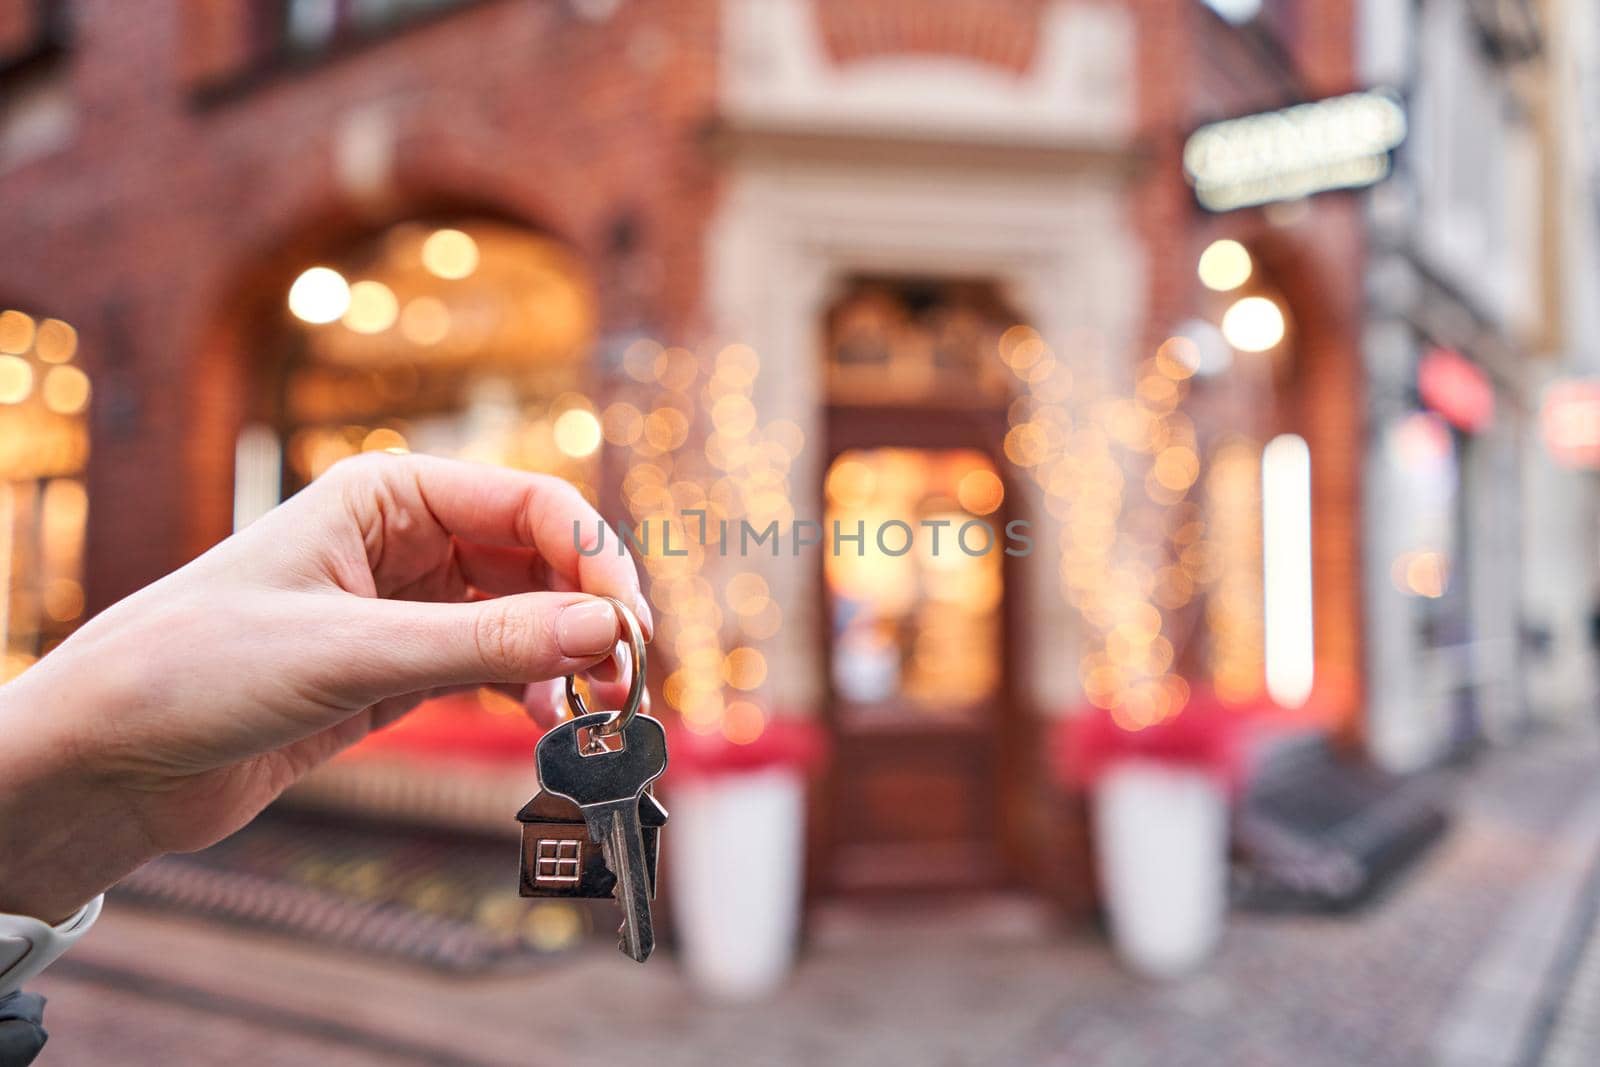 Rent a house for Christmas. Mortgage or rent concept. Woman holding key with wooden house keychain . Real estate, hypothec, moving home or renting property. Christmas mood in blurred background. by Malkovkosta